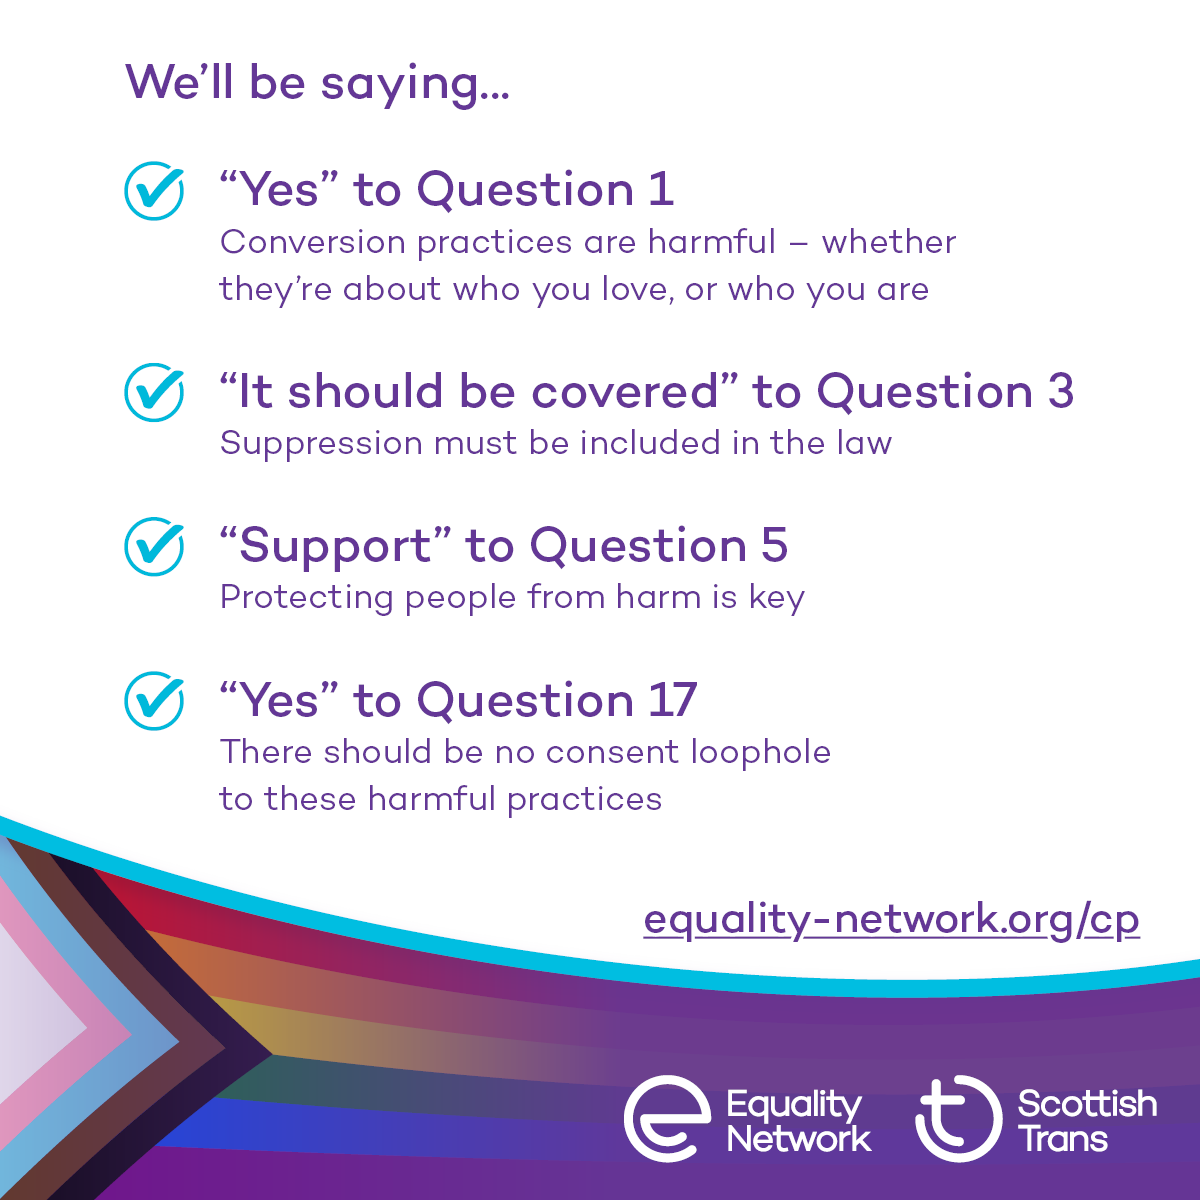 Conversion practices seek to change or suppress who we are and who we love on the basis that being LGBTQA+ is 'wrong', and that it's better to be heterosexual and/or cisgender. Help end conversion practices in Scotland – respond to the consultation today: equality-network.org/cp